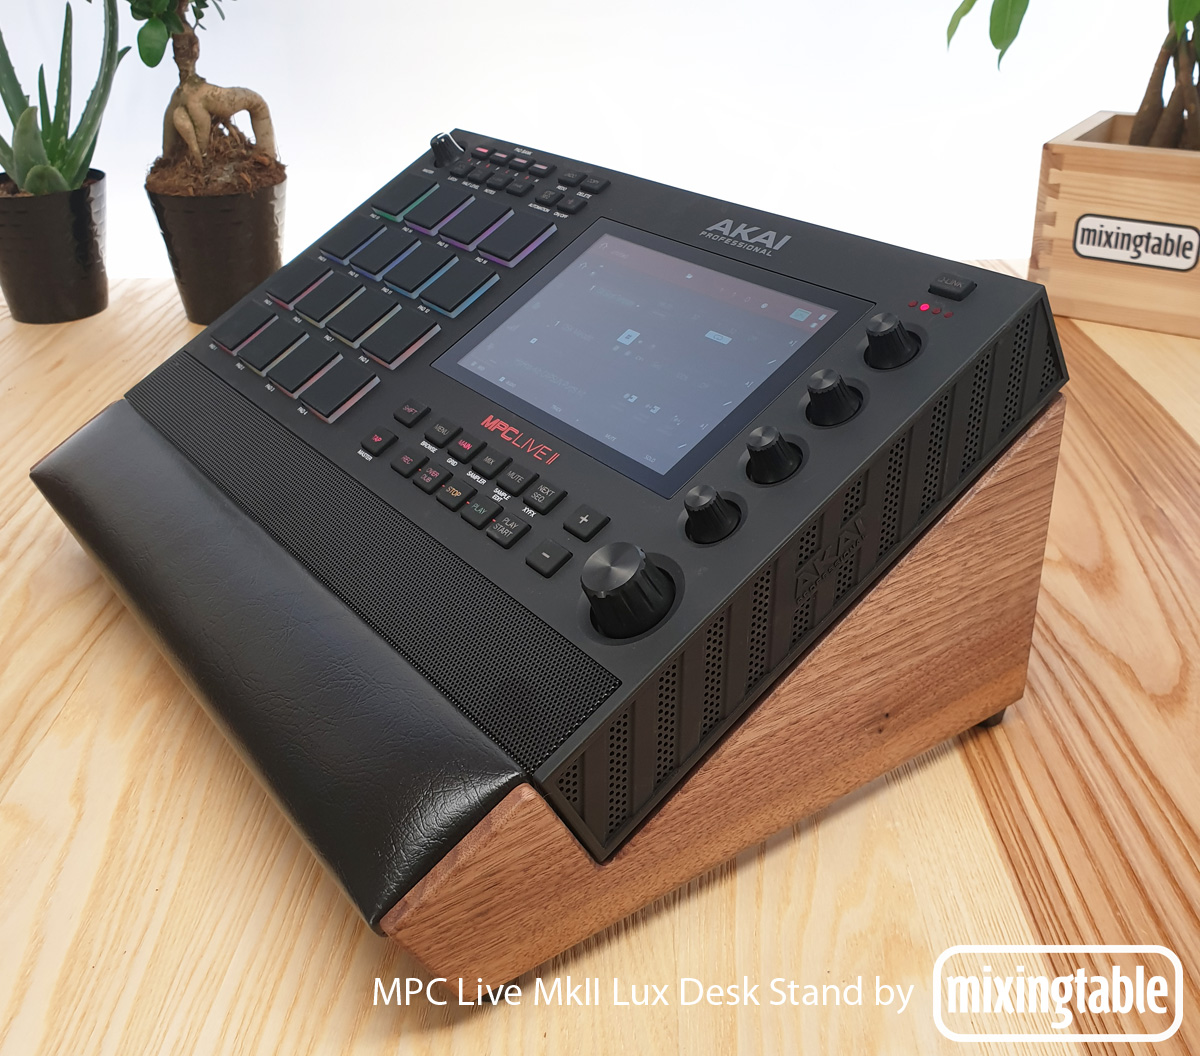 remixlive with mpc live